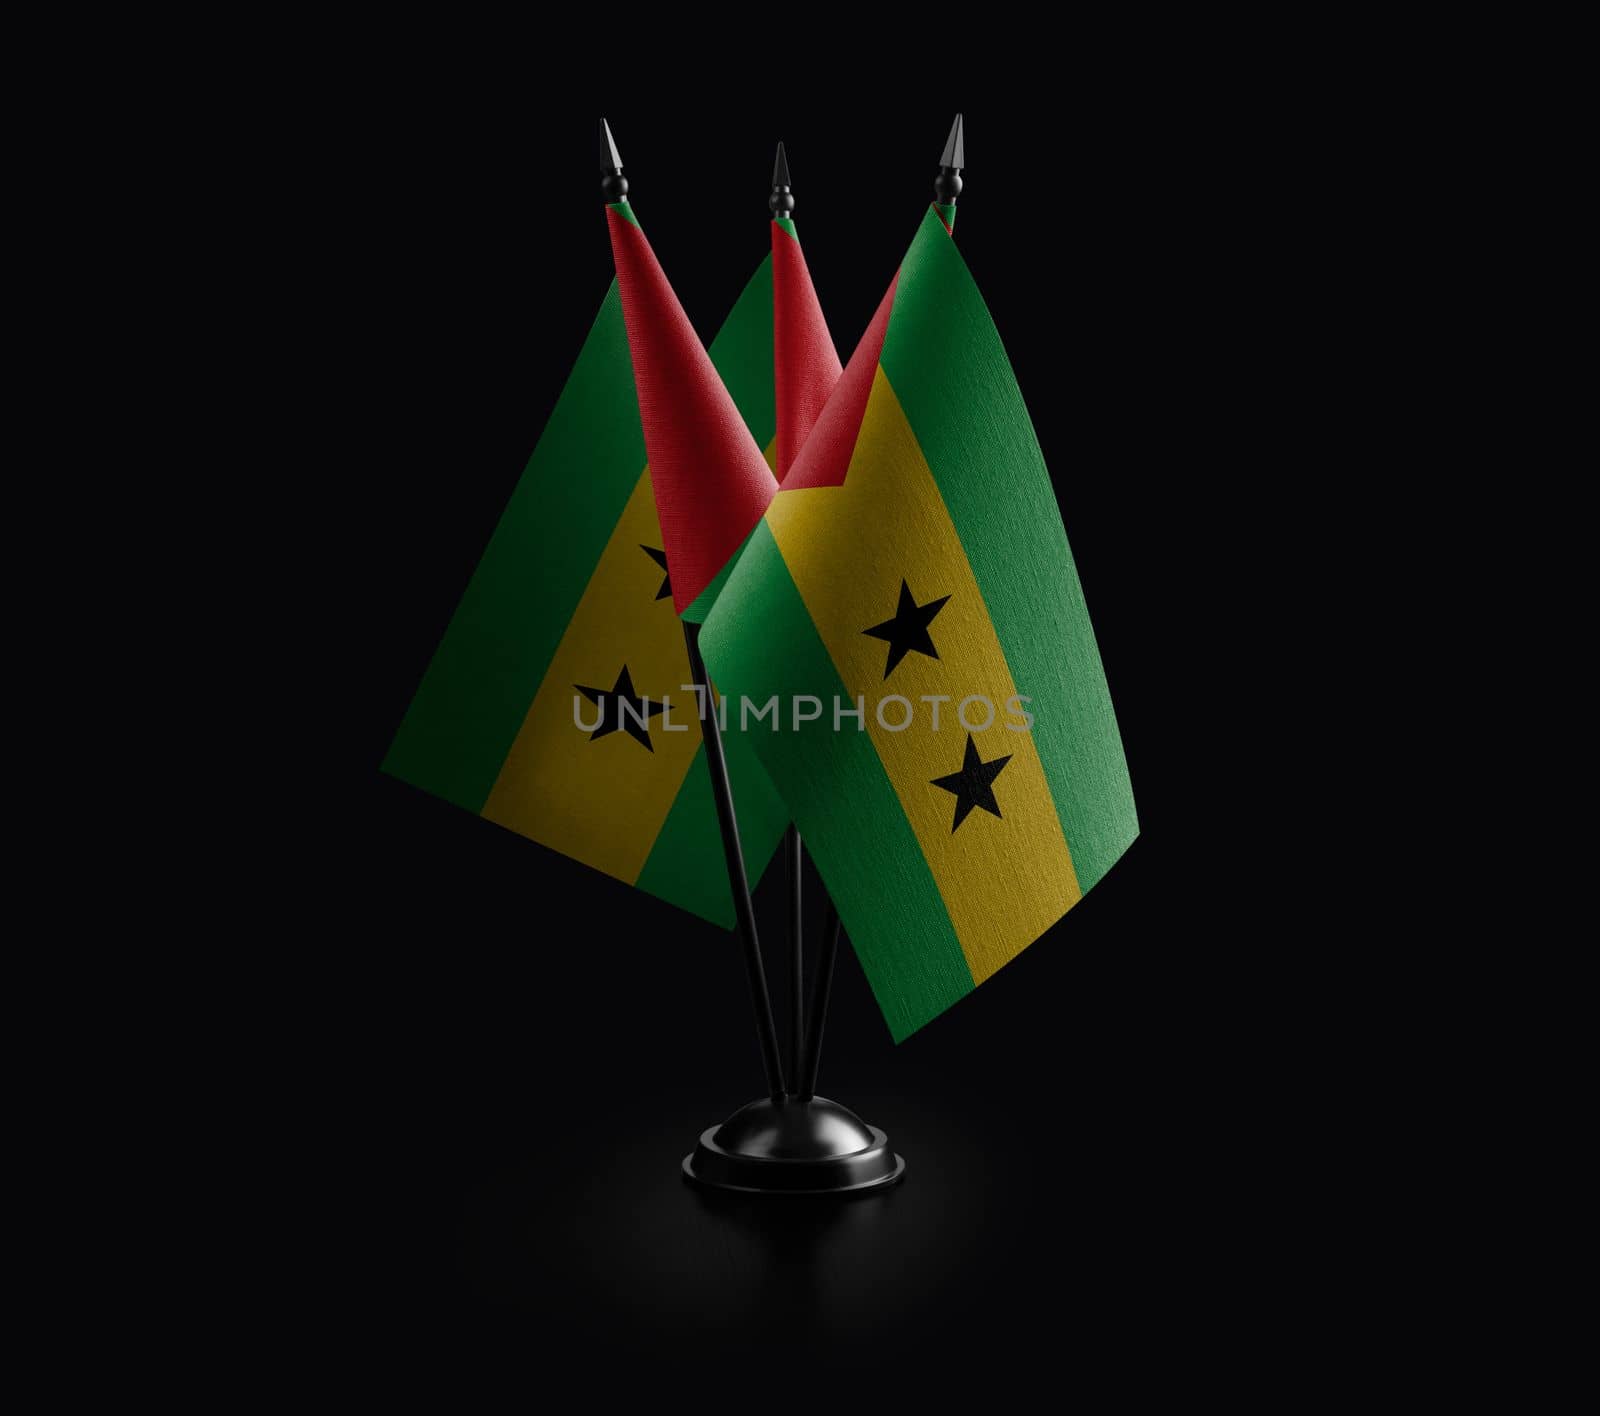 Small national flags of the Sao Tome and Principe on a black background by butenkow